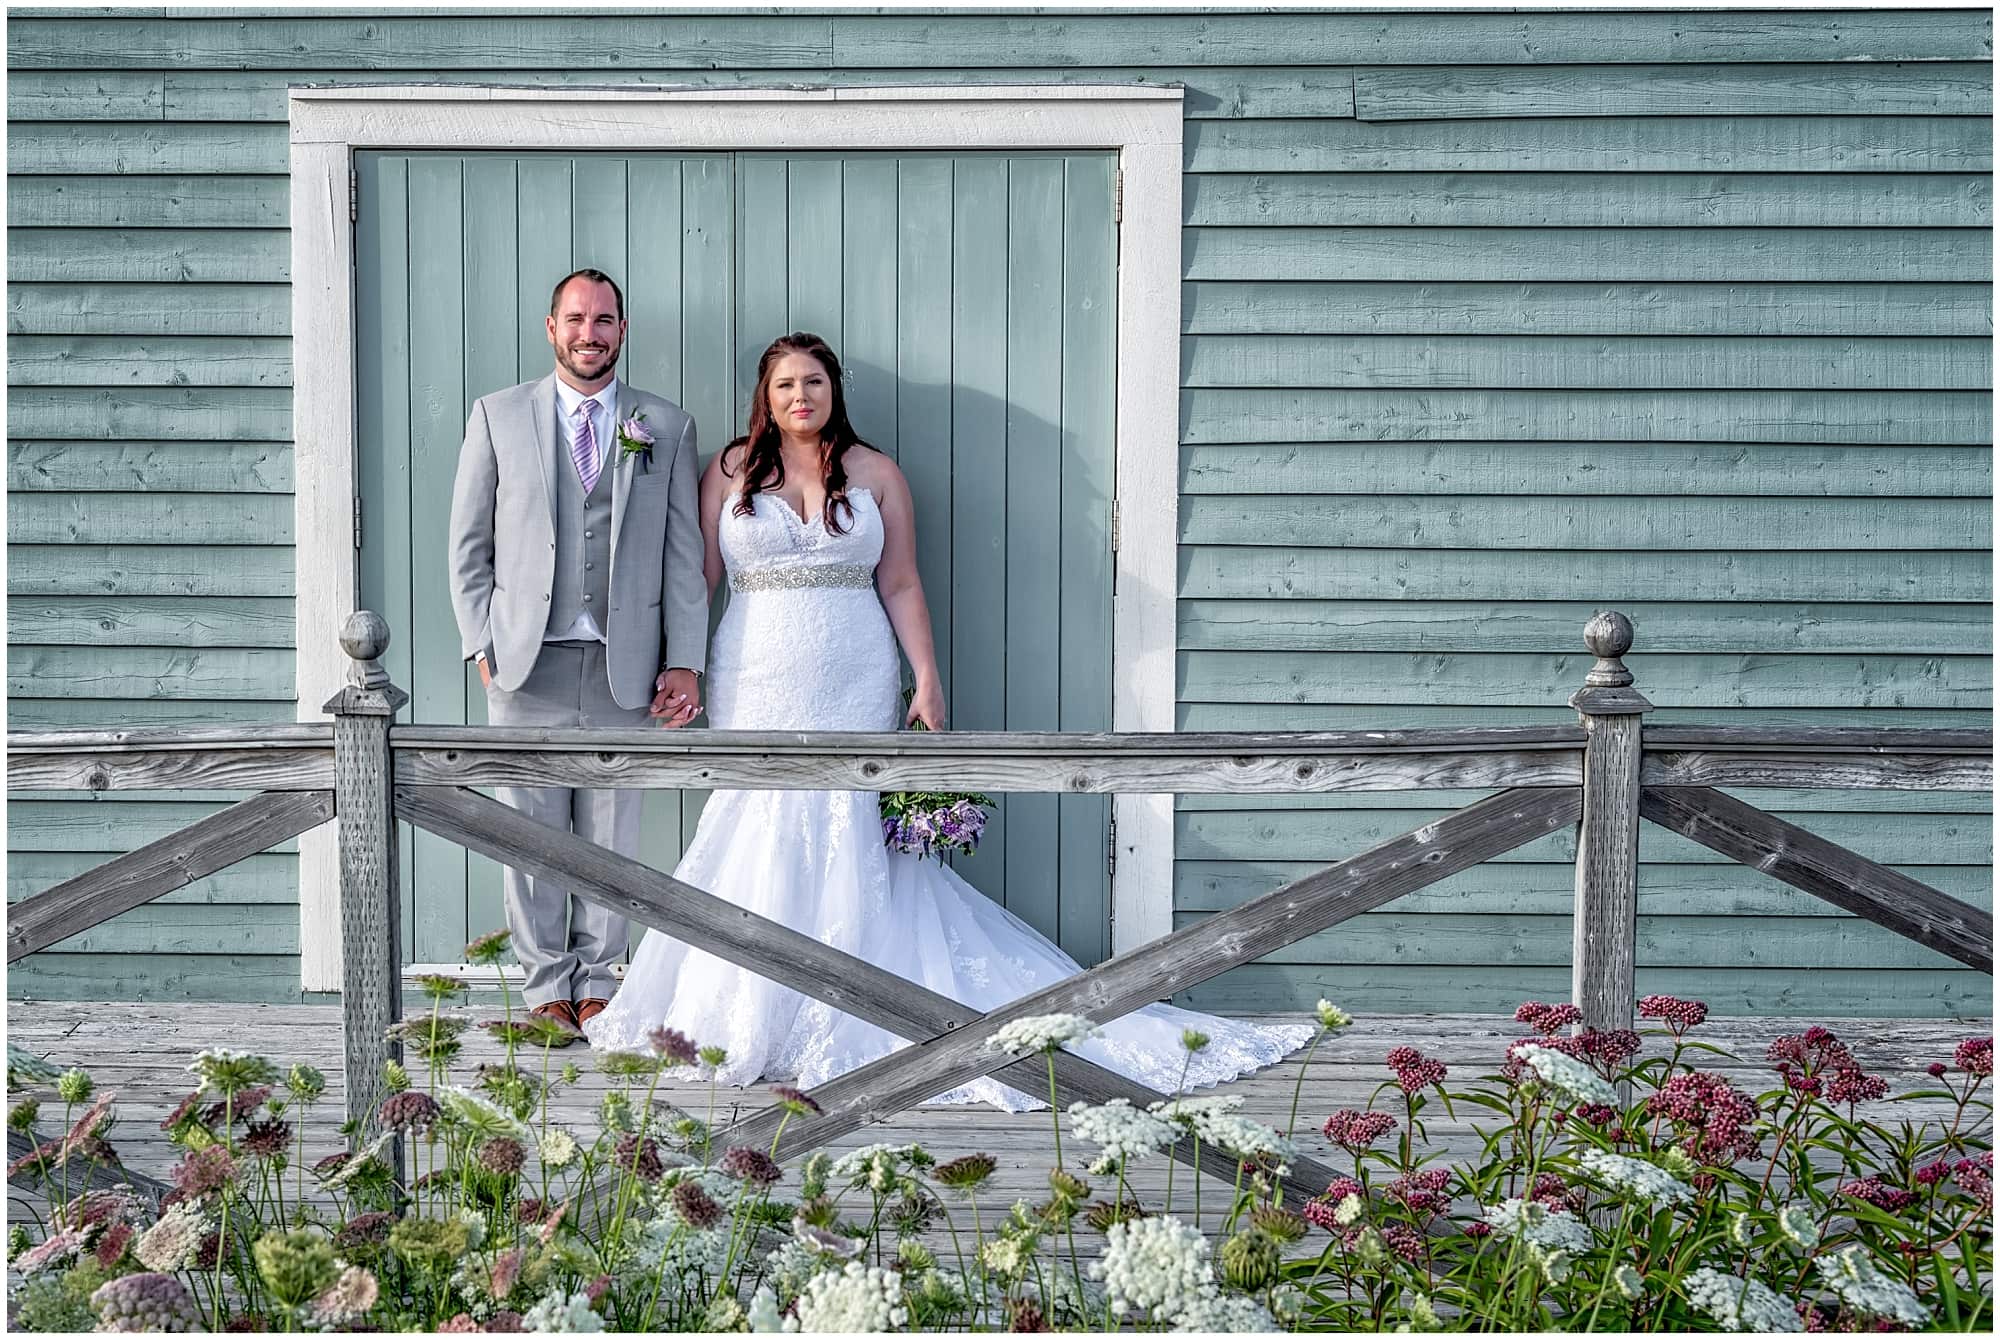 The bride and groom pose for wedding photos at their White Point wedding against a rustic barn style building.